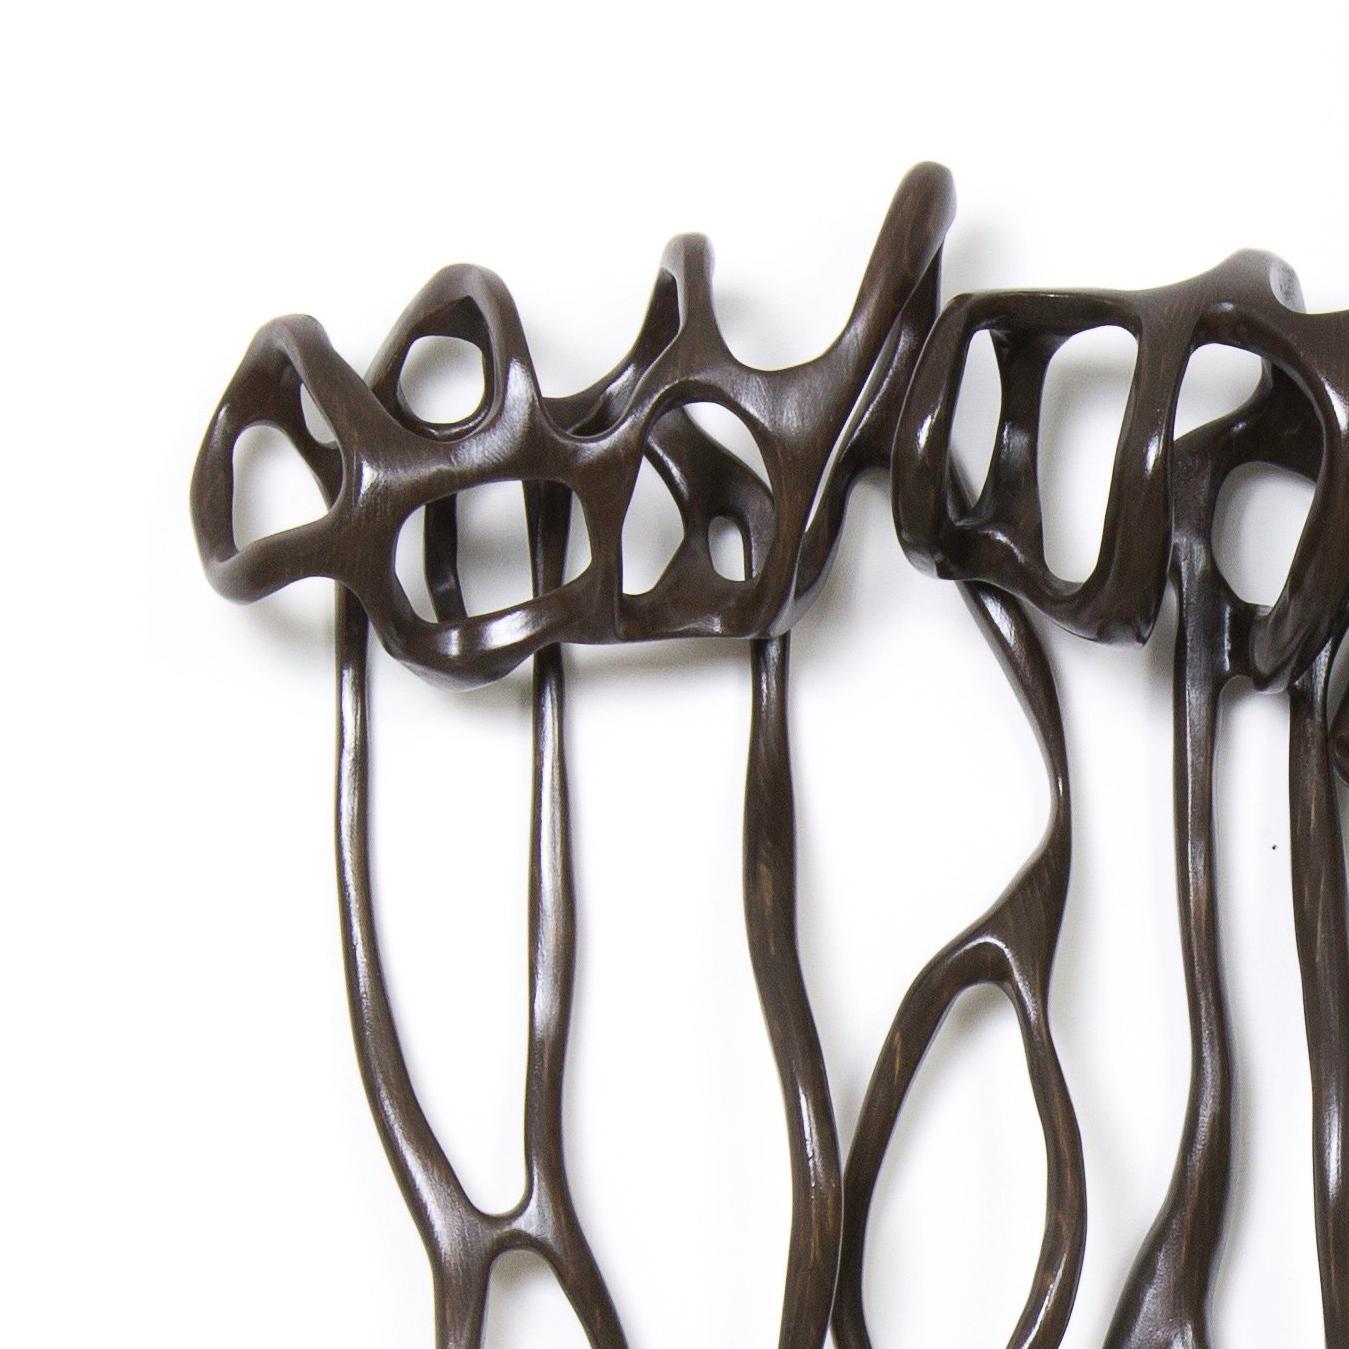 Charcoal Brown Double Loops - Sculpture by Caprice Pierucci